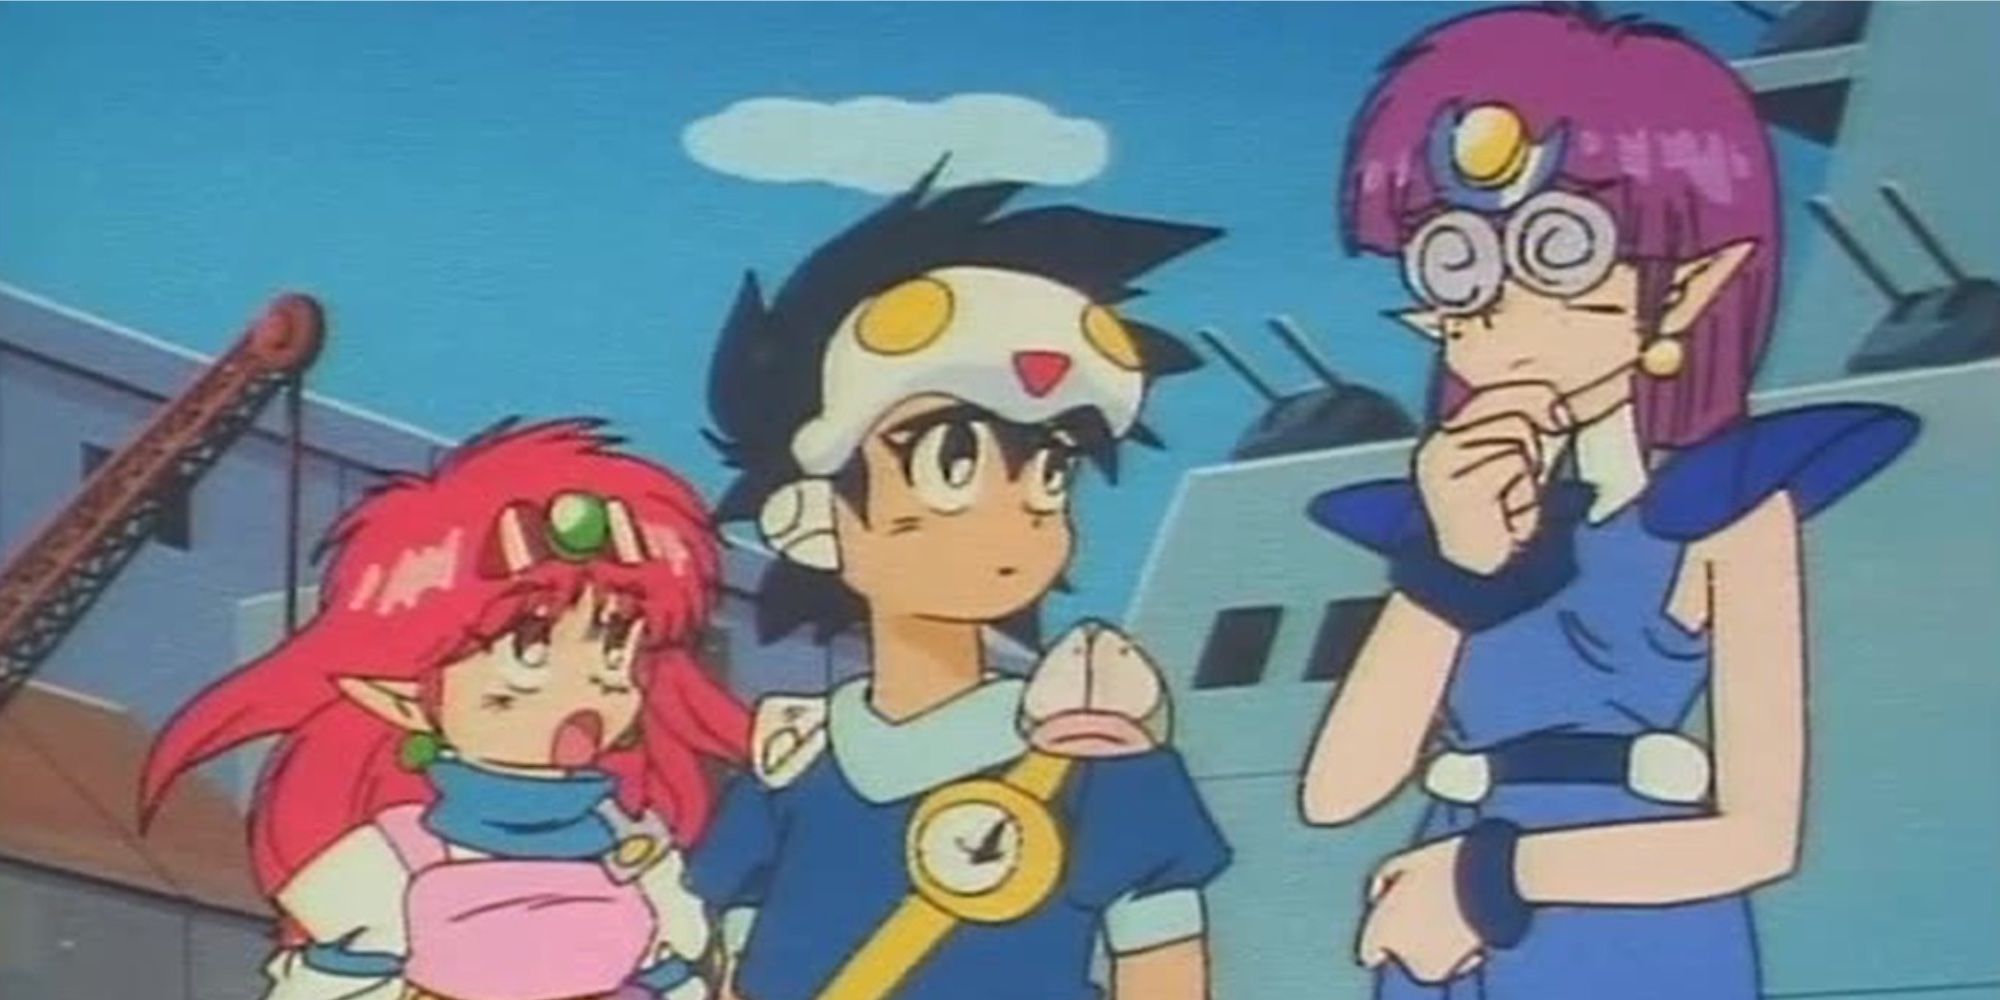 Ramune worried about his friends